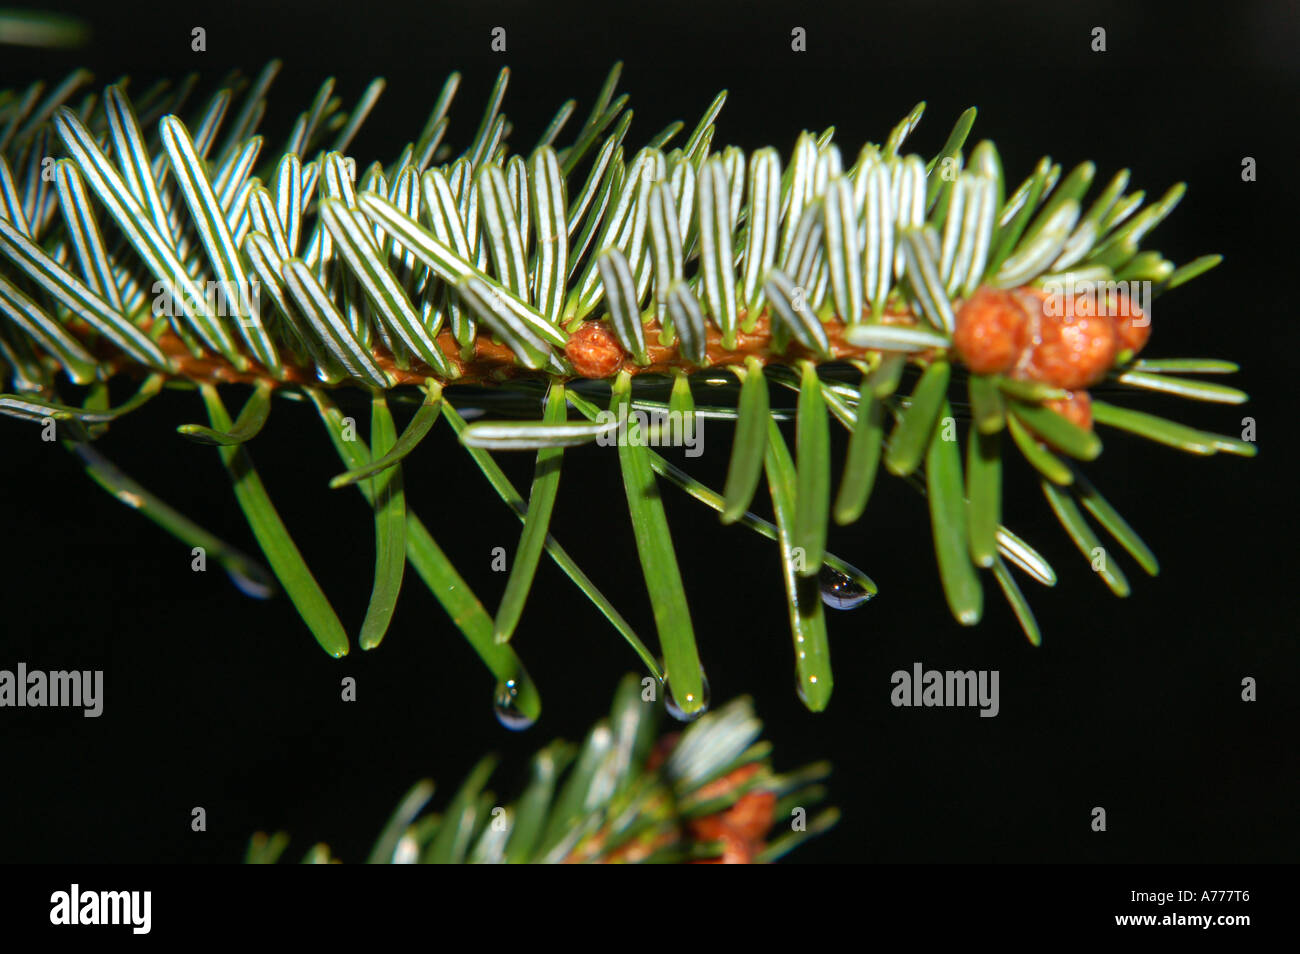 pine needles with droplets of rain number 2325 Stock Photo